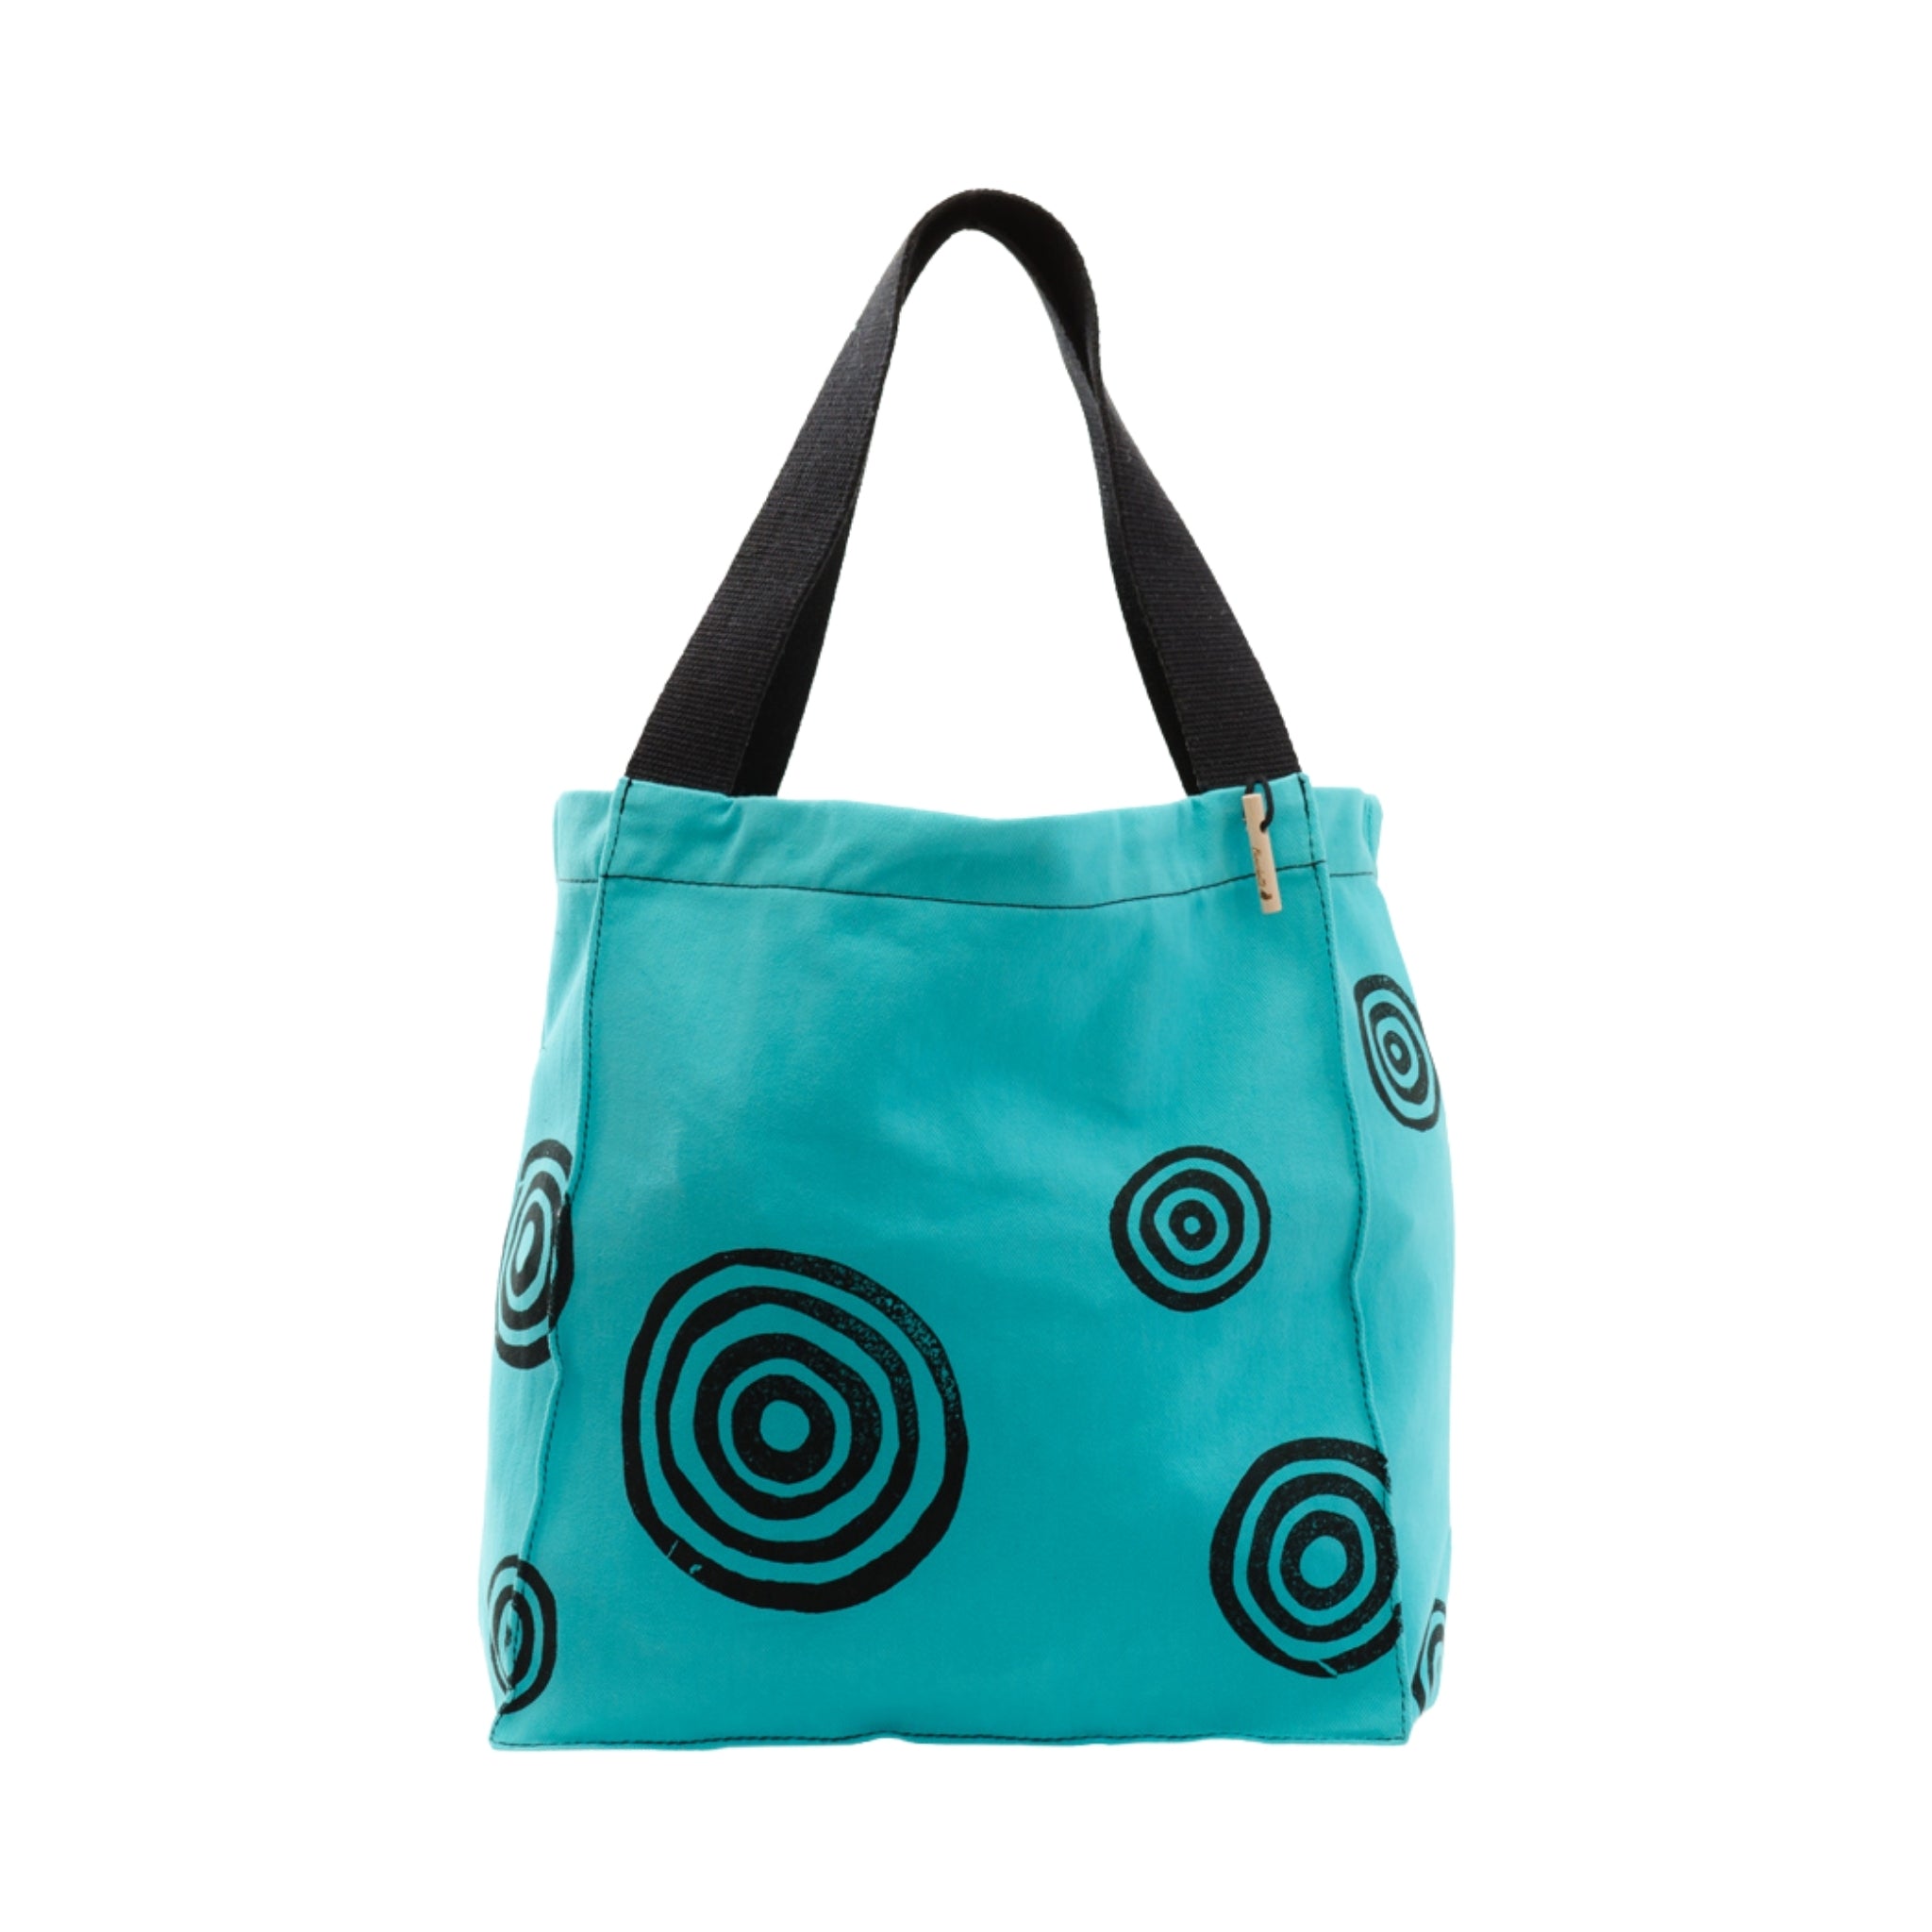 Art Tote Bag Turquoise 'Time'